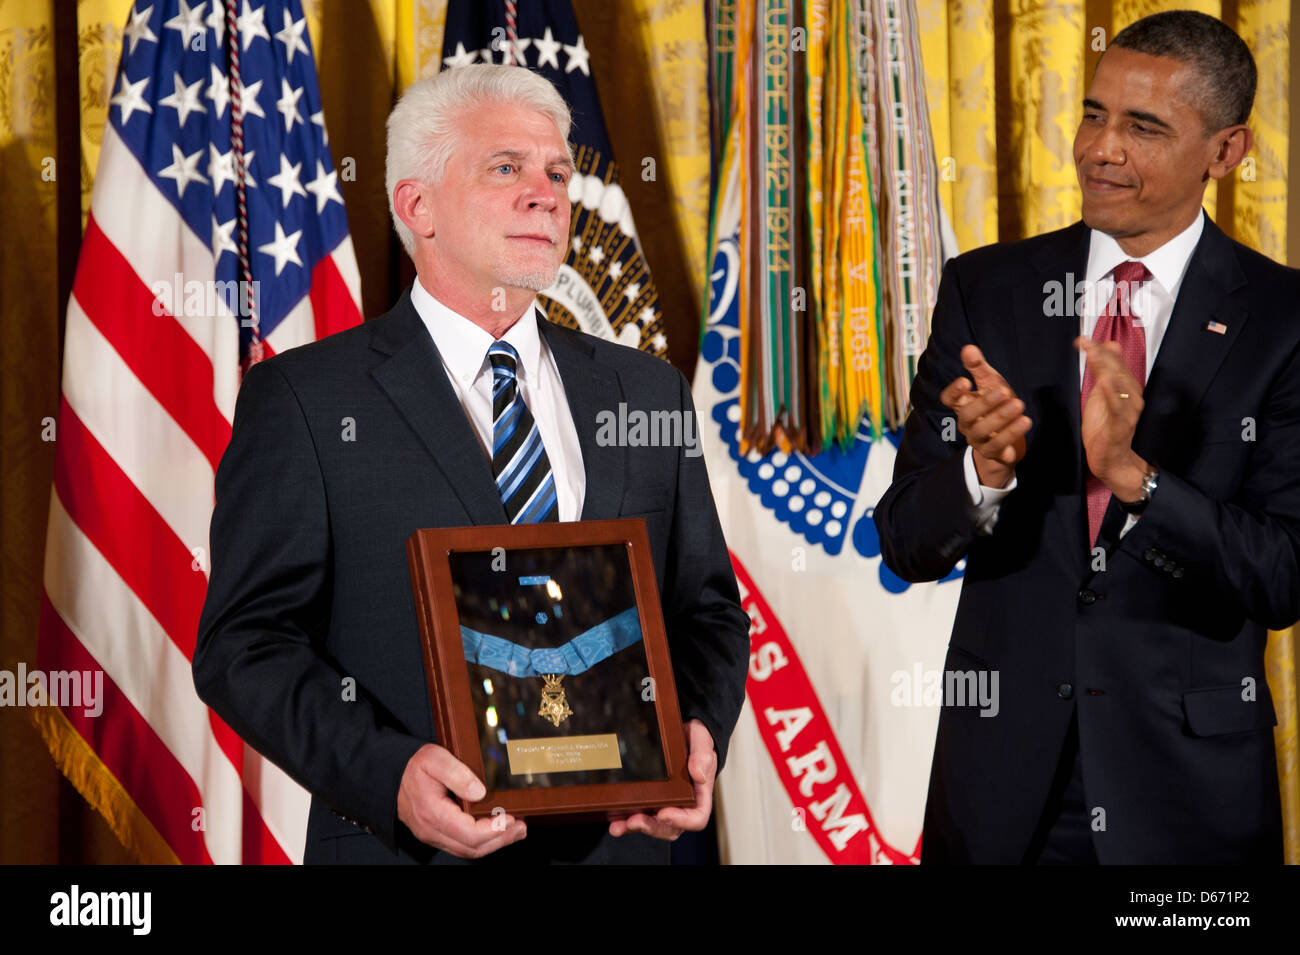 US President Barack Obama awards the Medal of Honor to US Army Chaplain Capt. Emil Kapaun, accepted posthumously by his nephew Ray, left, during a ceremony in the East Room of the White House April 11, 2013 in Washington, DC. Father Kapaun was honored for his heroism during combat at Unsan, Korea and later died as a POW. Stock Photo